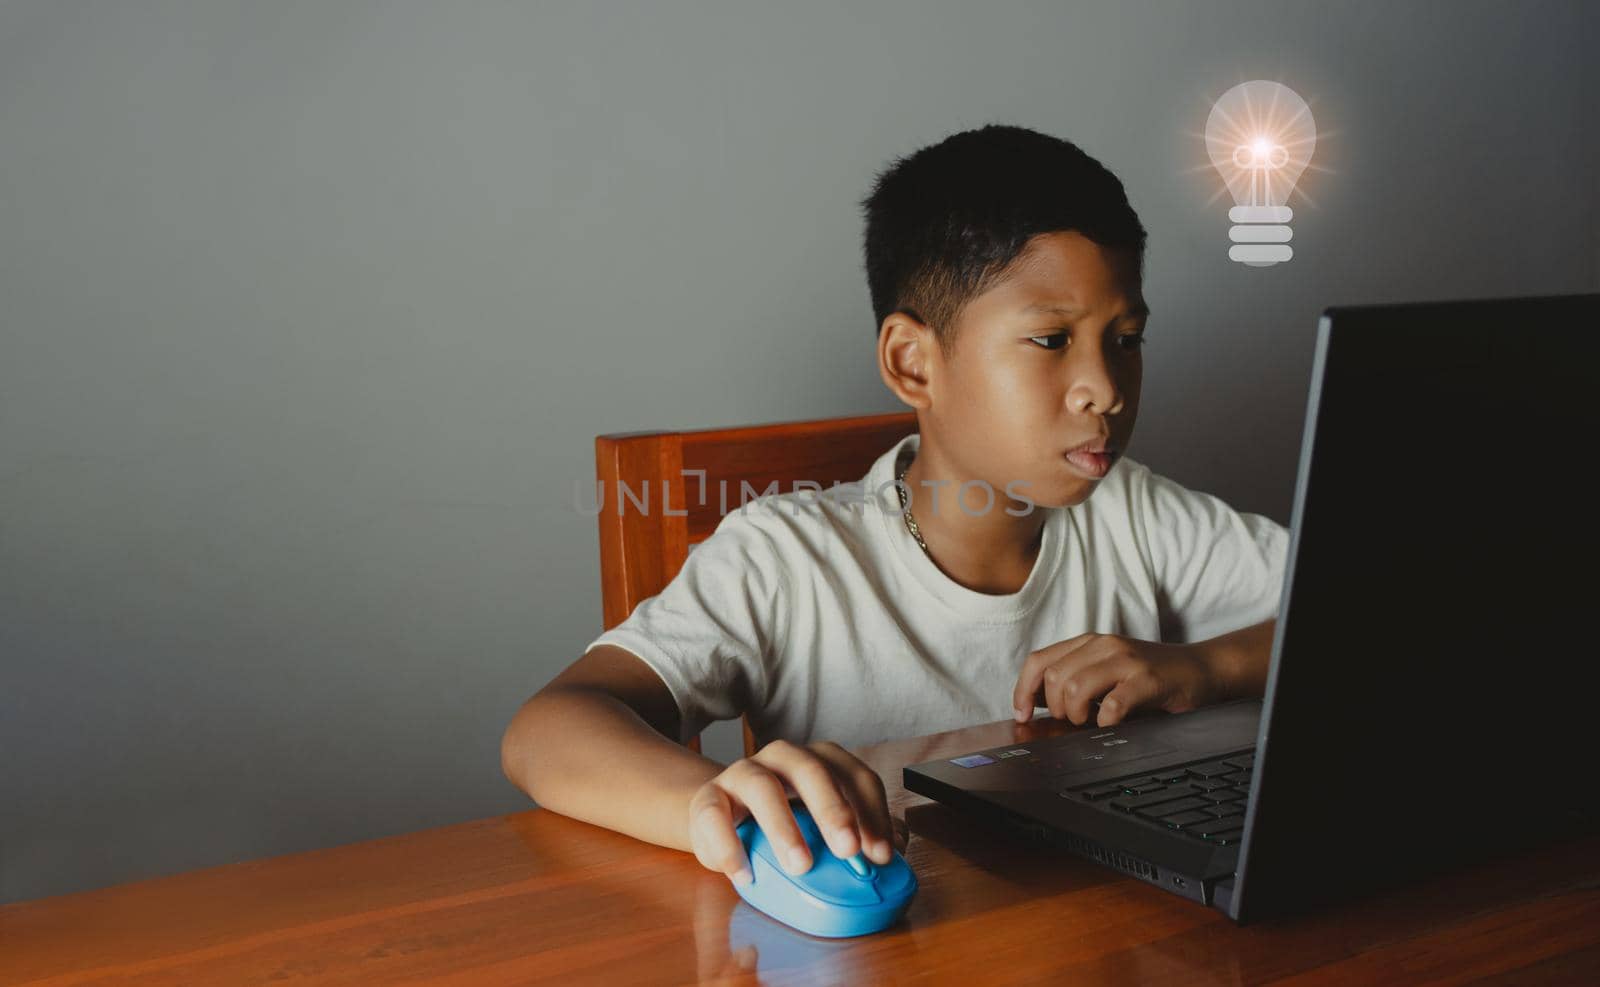 Close up The boy sits staring at the laptop and his hand is holding the mouse. educational concept, educational information search, copy space by Unimages2527